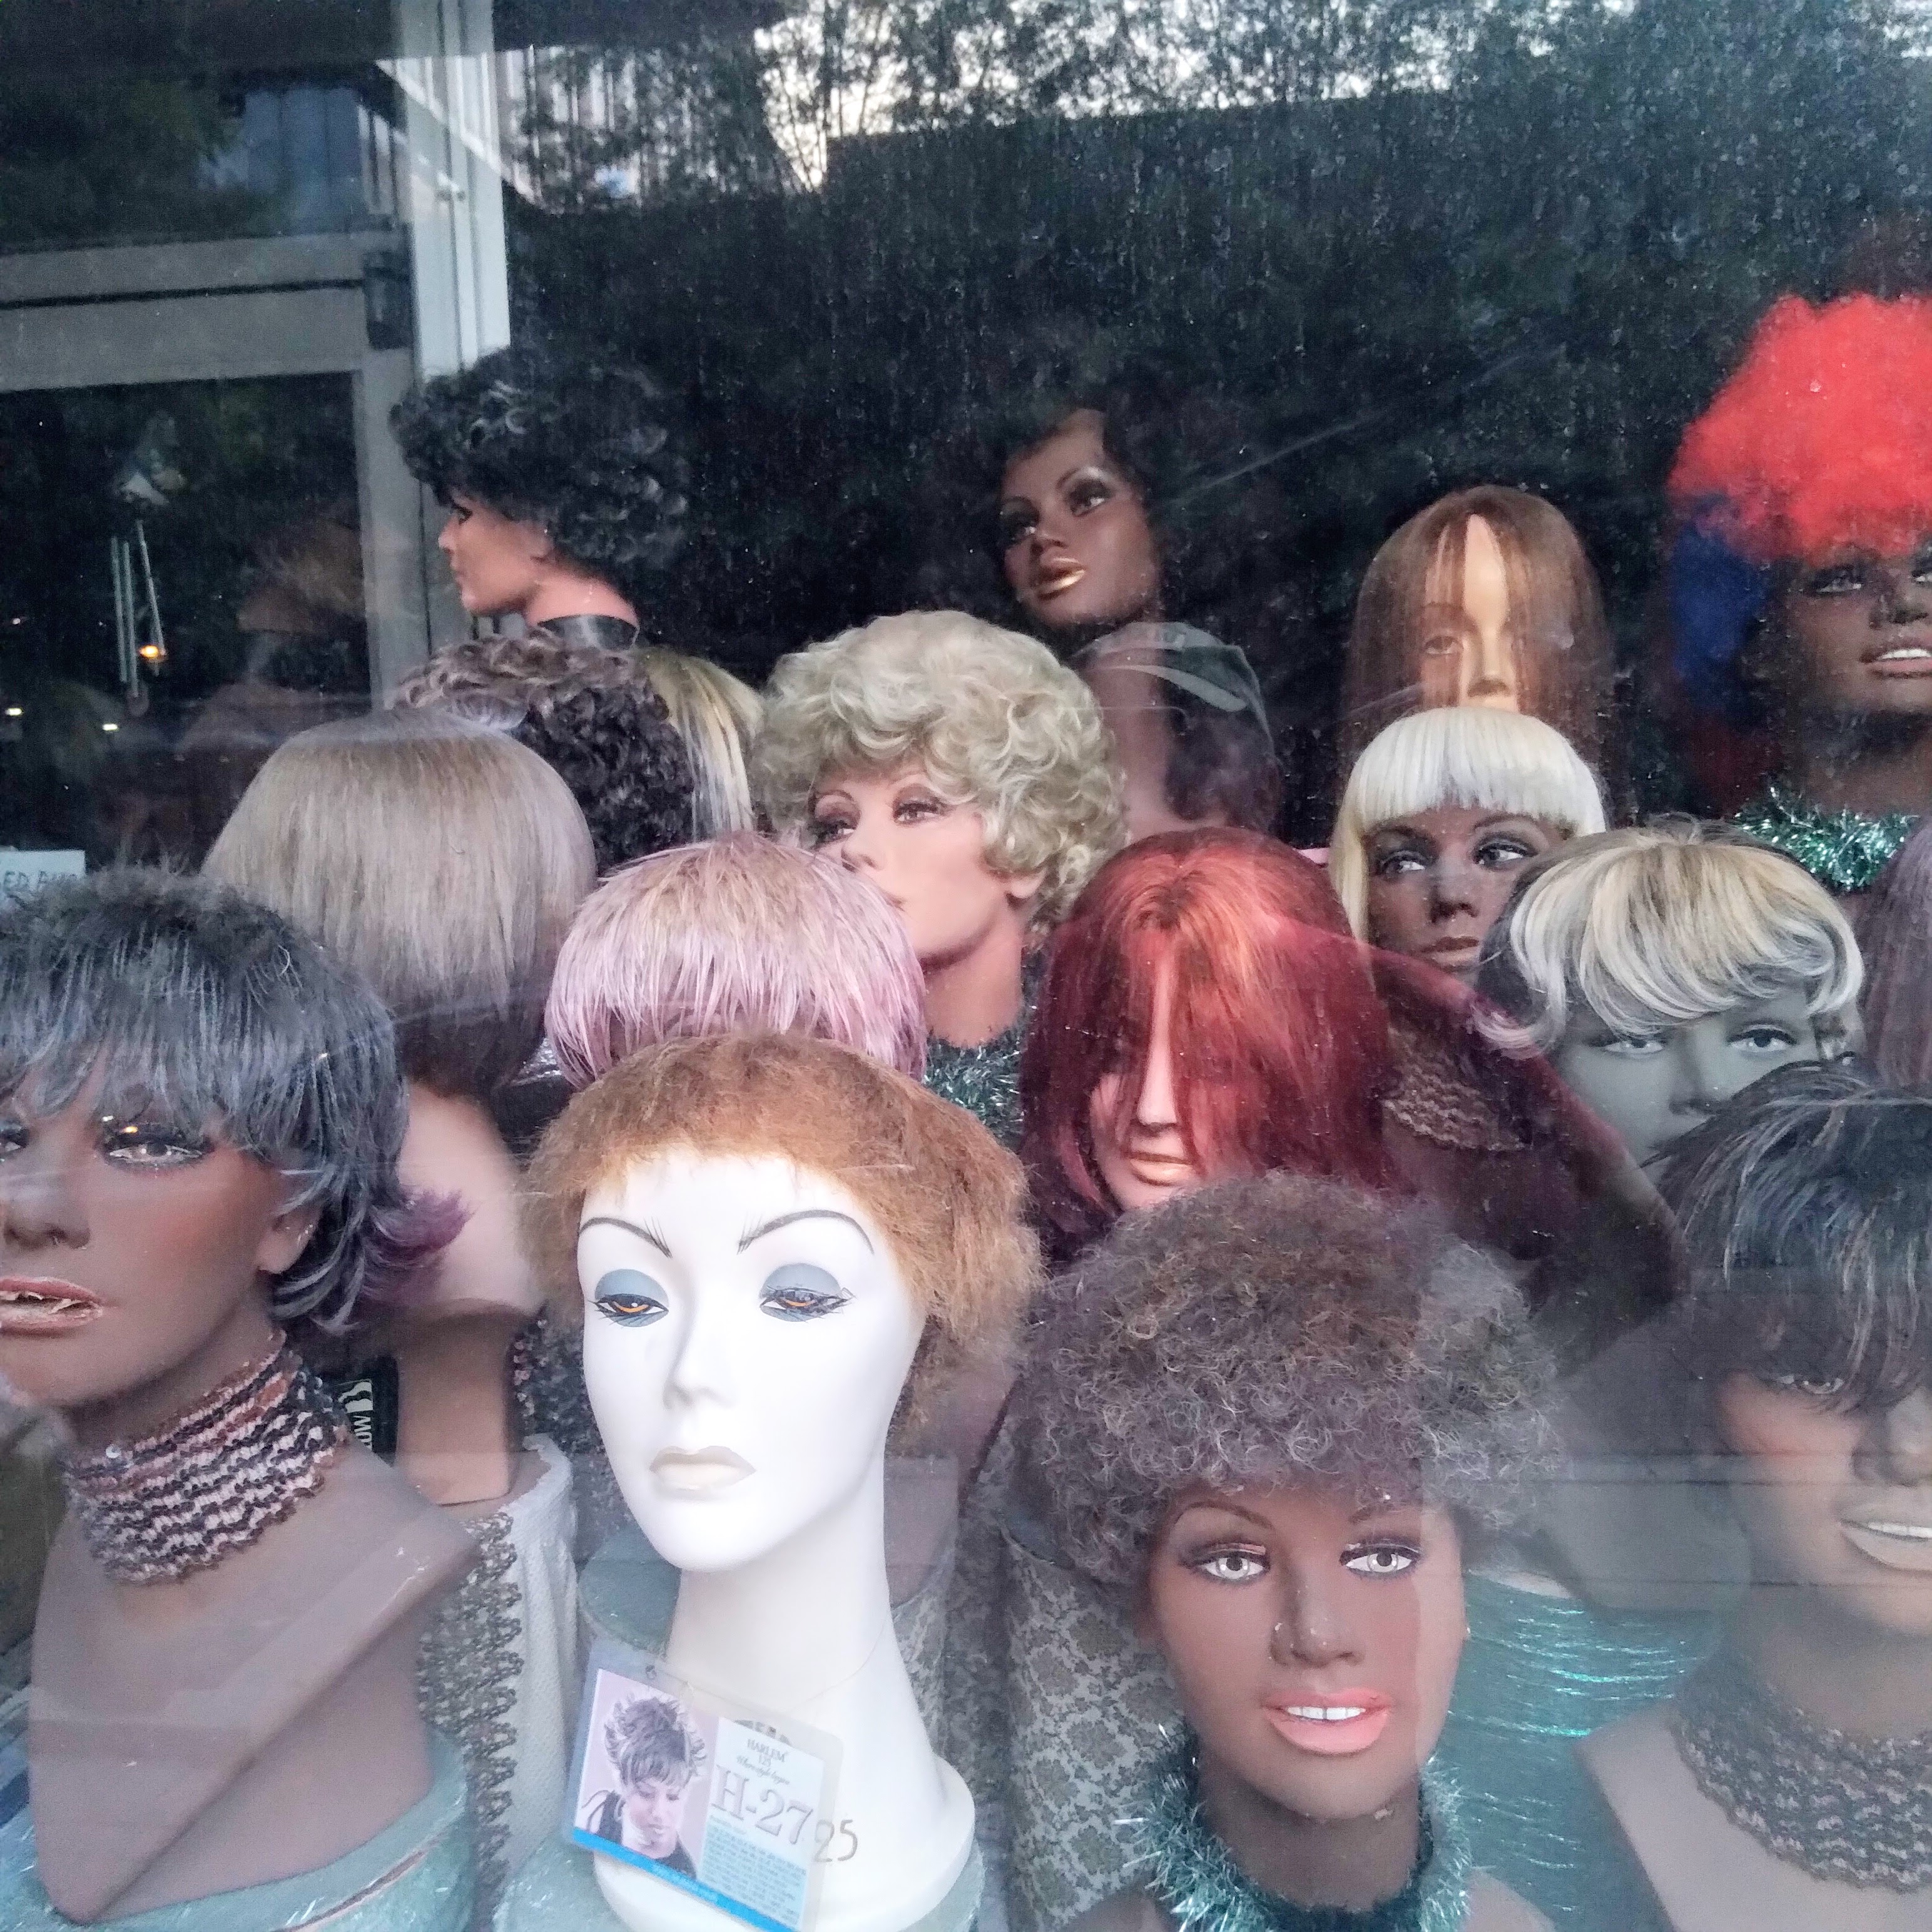 Wig shop on Market Street, Chattanooga, Tennessee, August 28, 2021. Photo by David Rhoden.